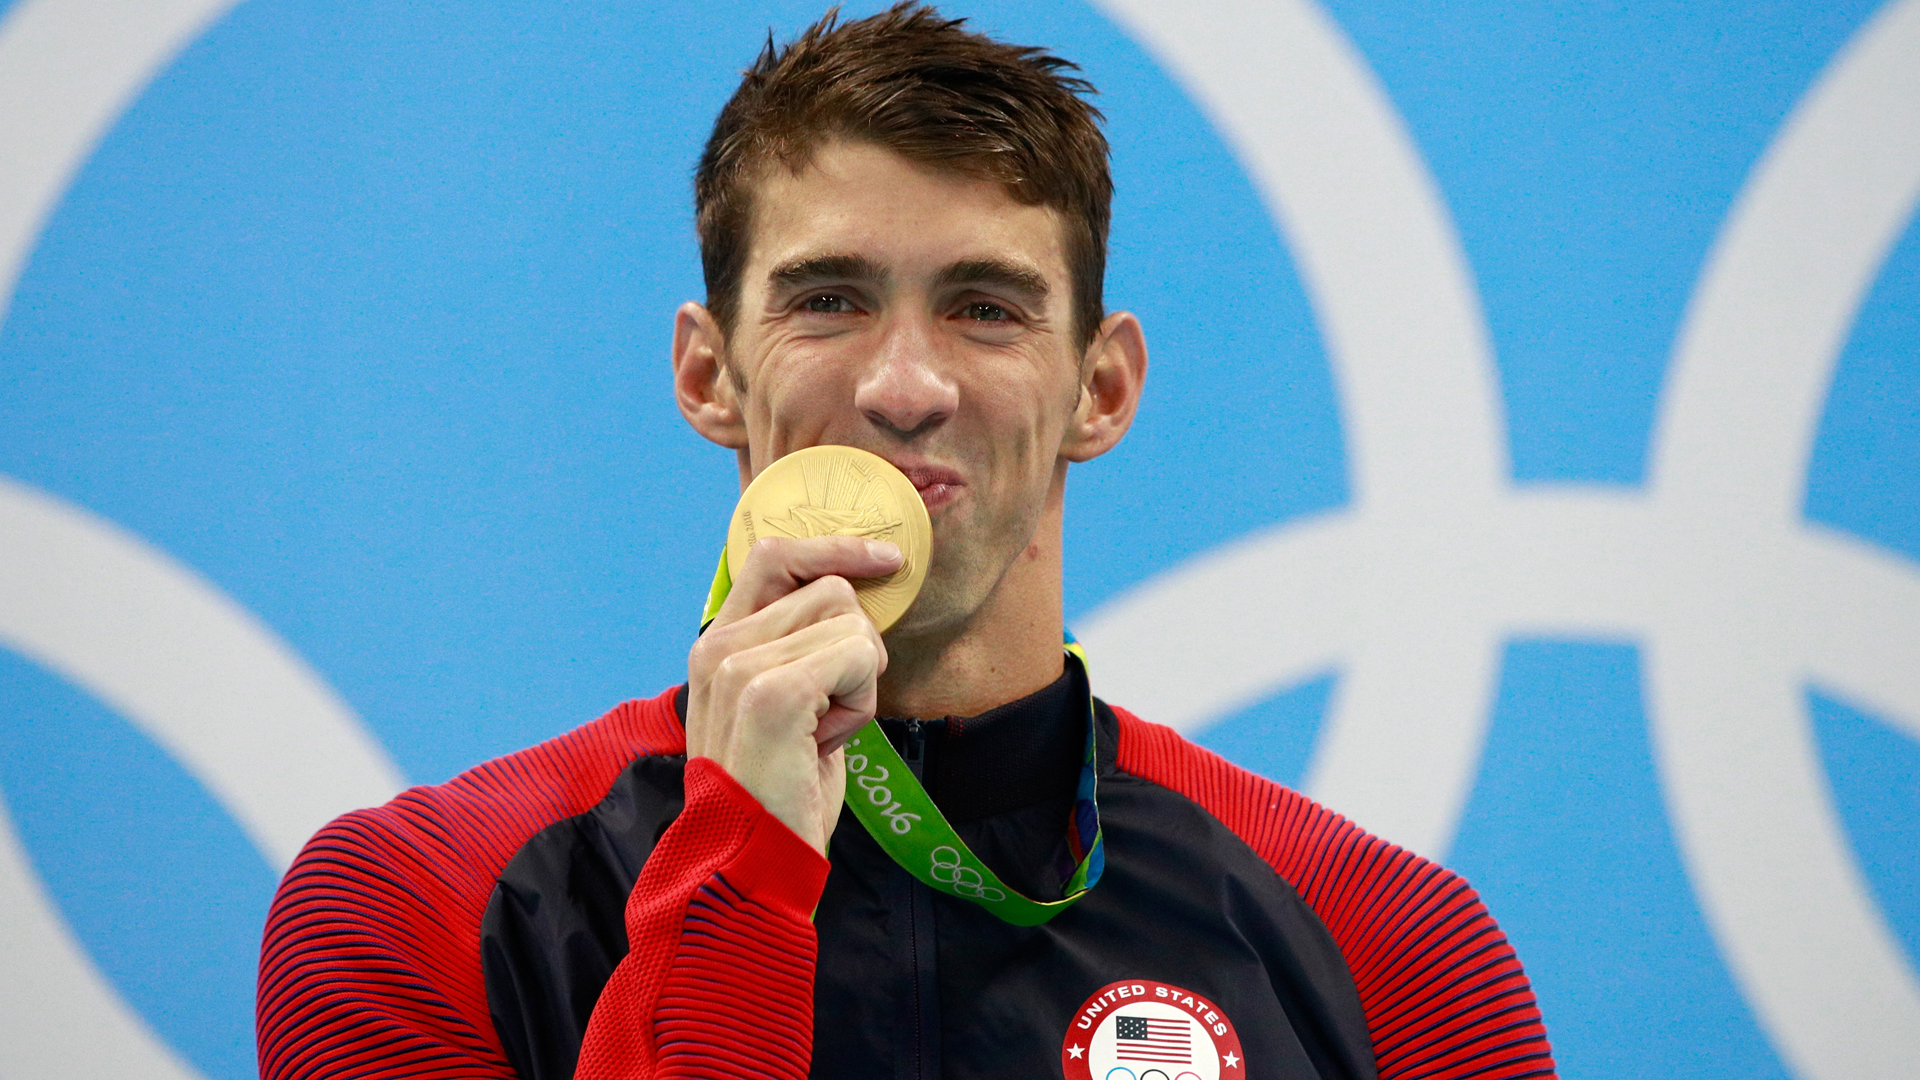 Rio Olympics 2016 Michael Phelps ends historic career with gold in